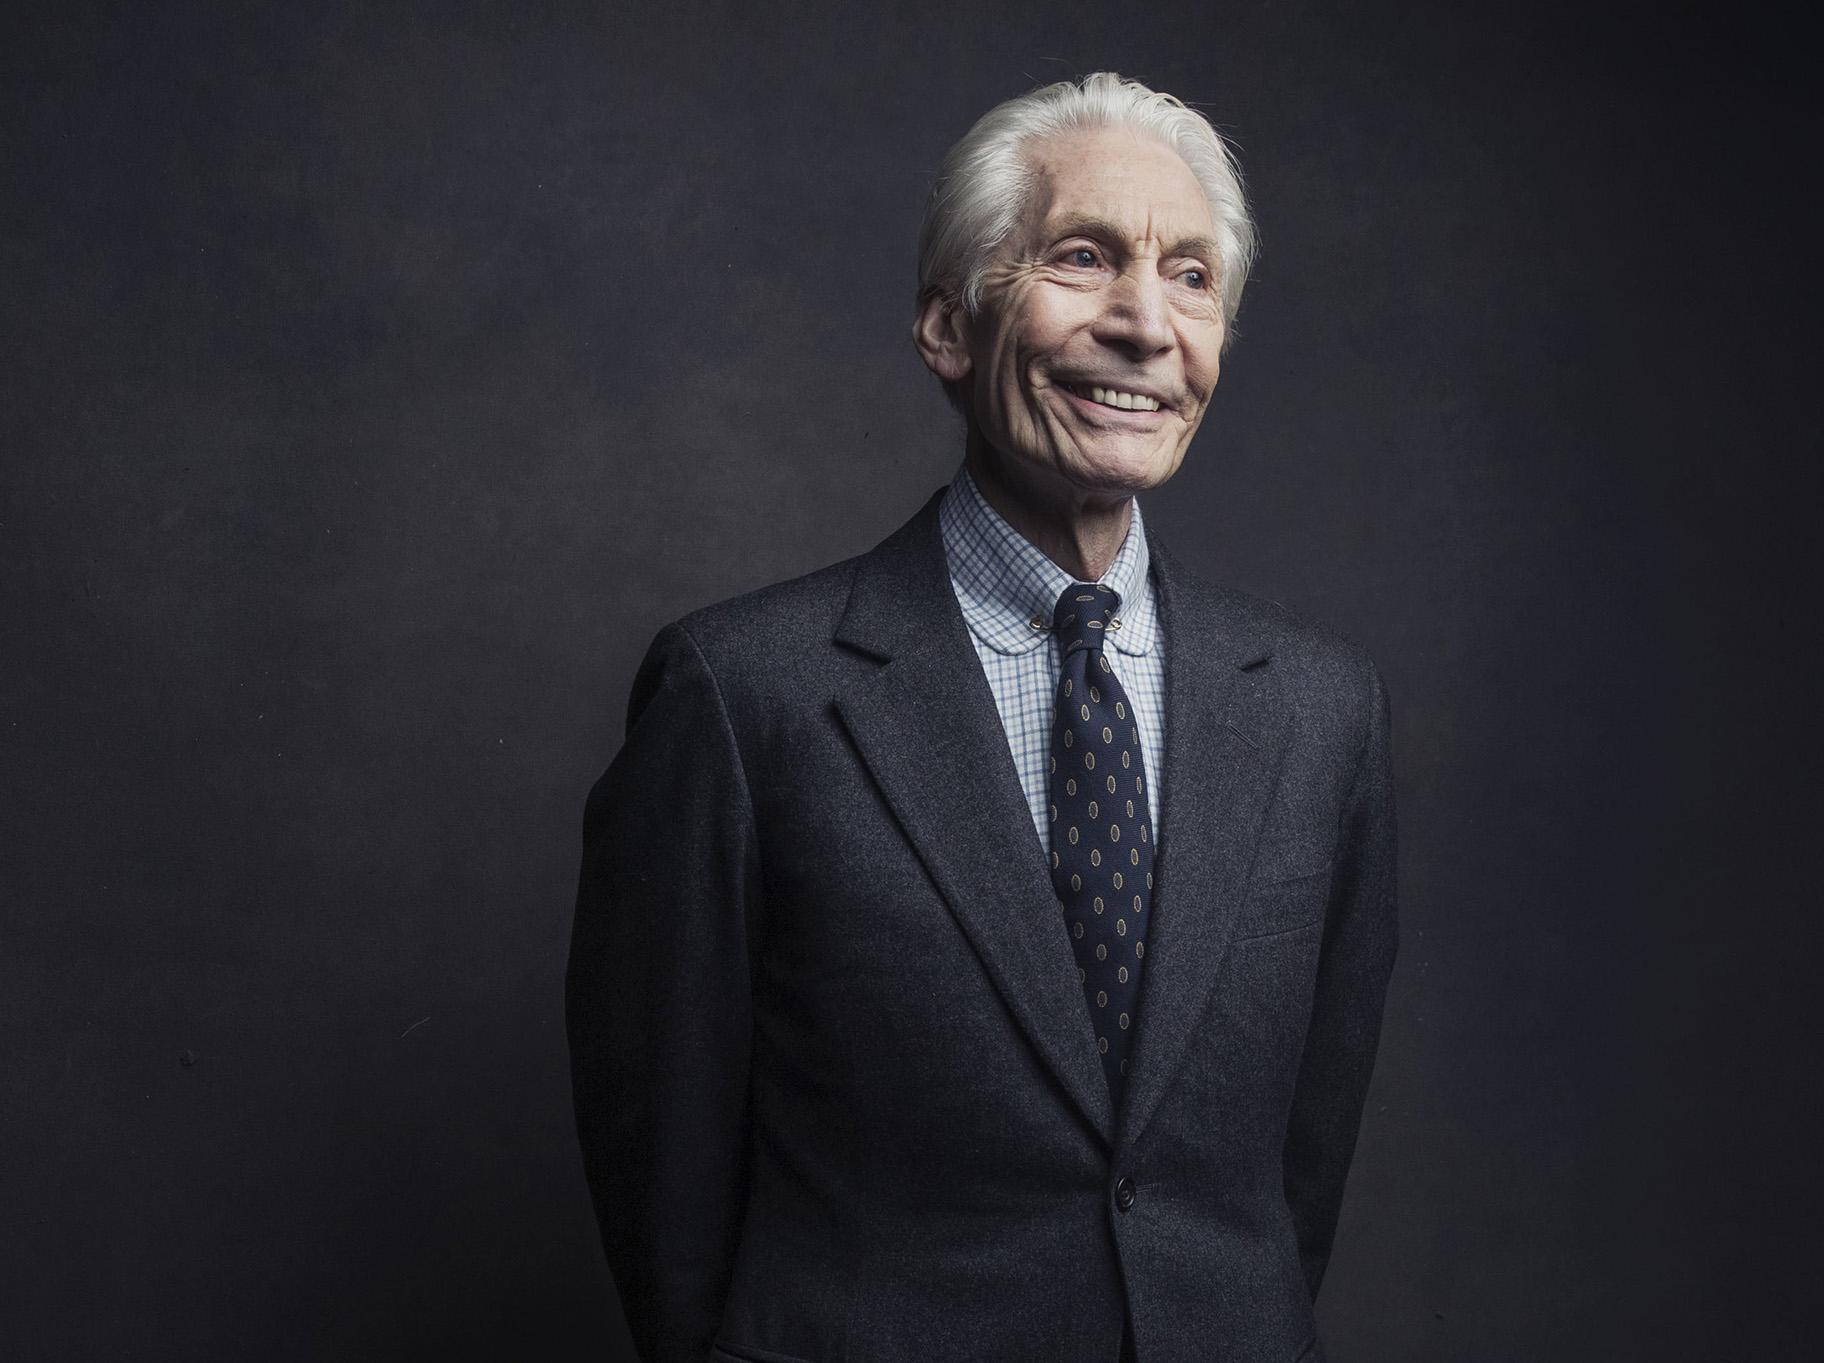 Charlie Watts of the Rolling Stones poses for a portrait on Nov. 14, 2016, in New York. (Photo by Victoria Will / Invision / AP, File)